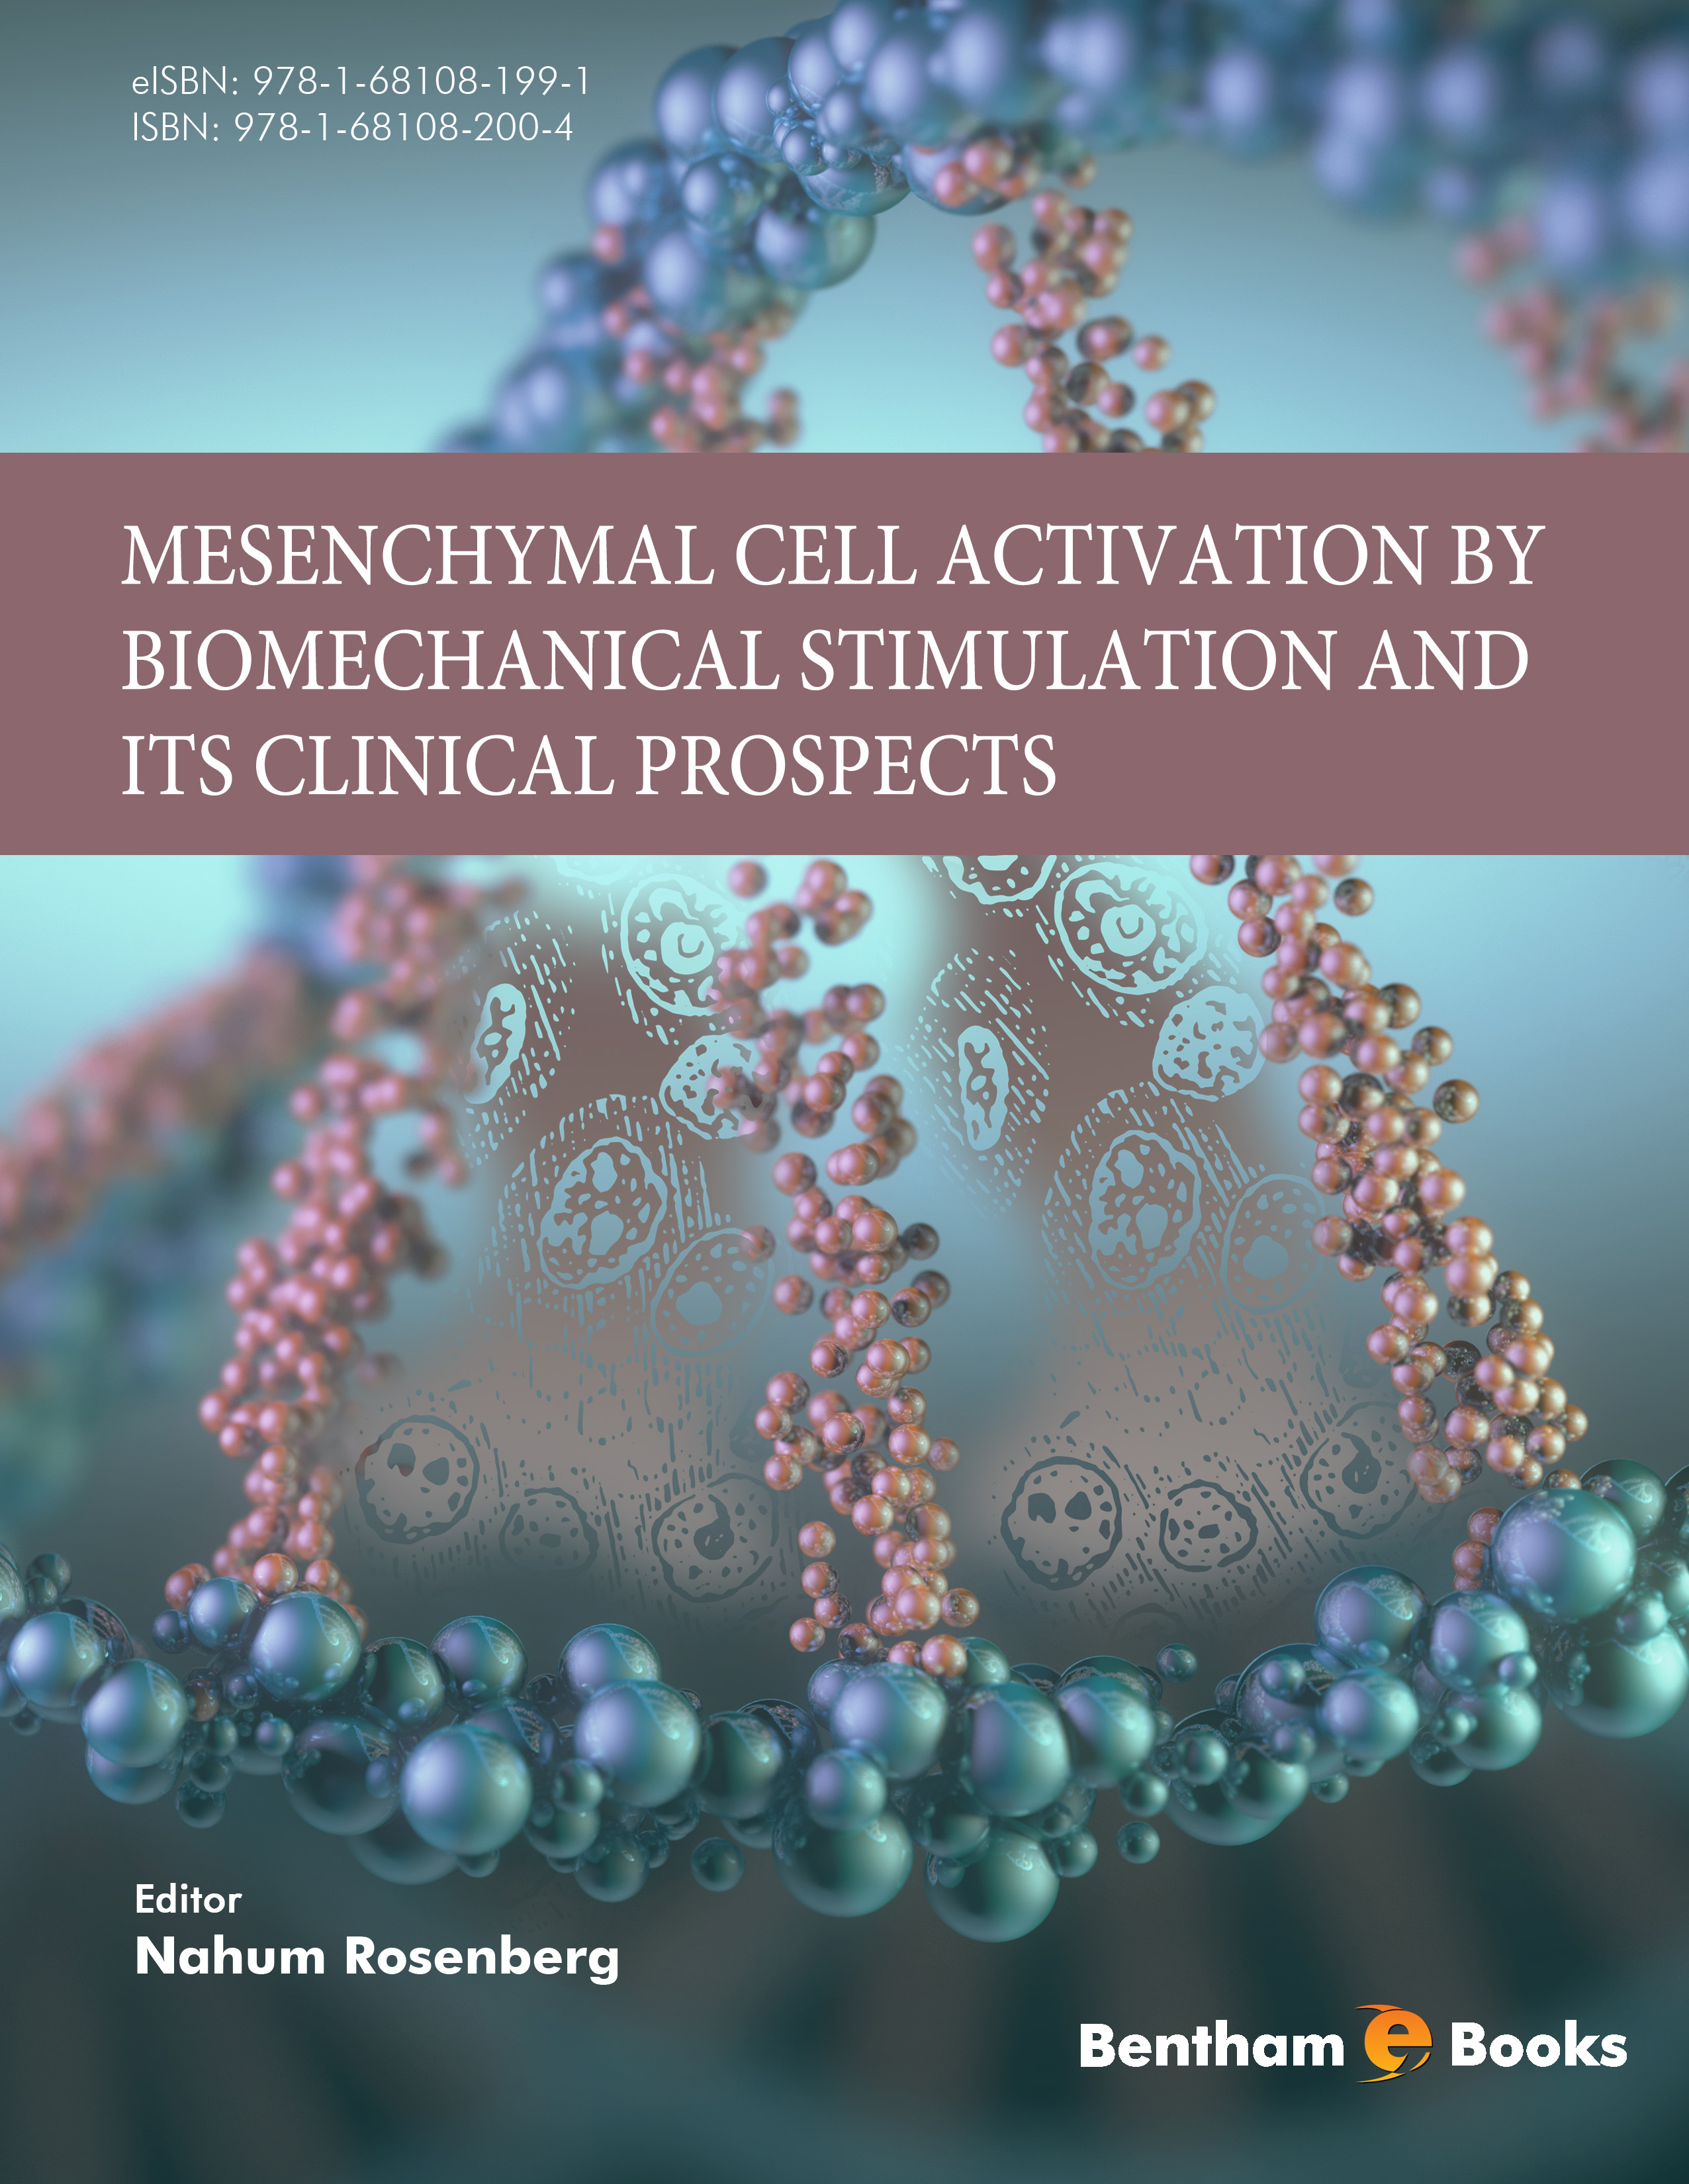 Mesenchymal Cell Activation by Biomechanical Stimulation and its Clinical Prospects